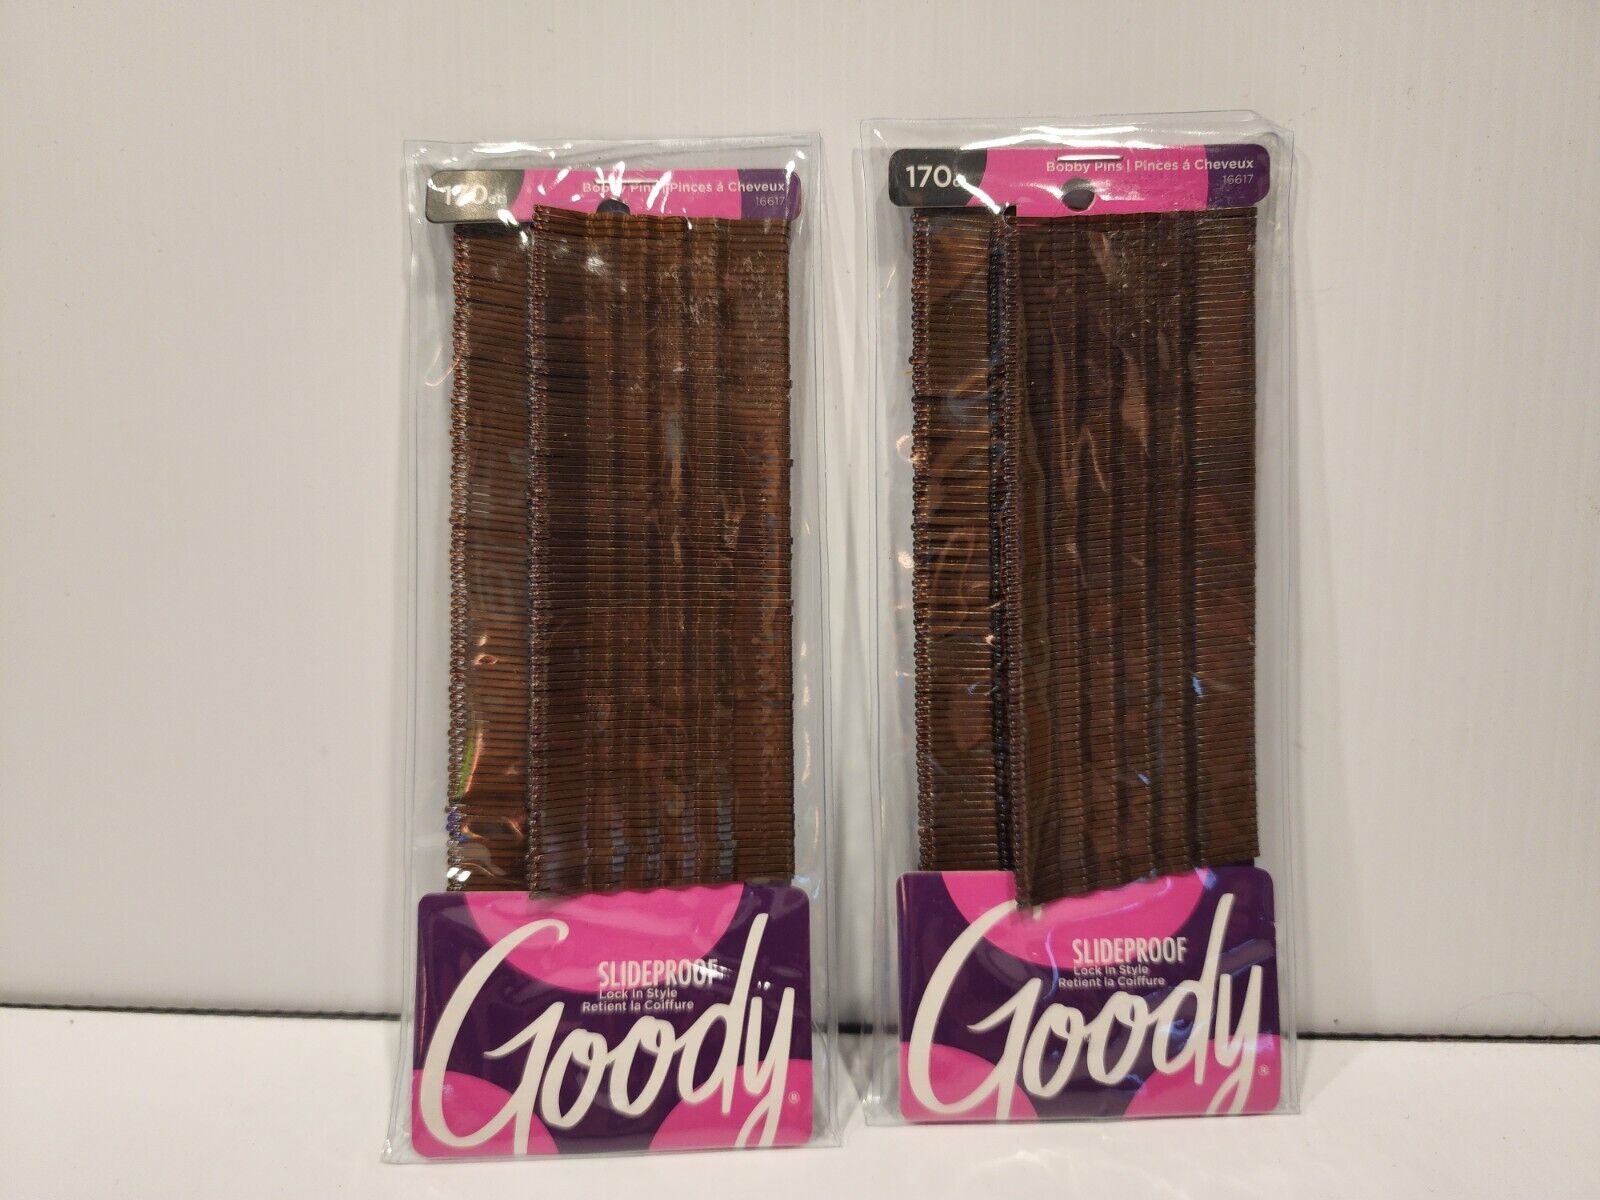 Goody SlideProof  Women's Bobby Hair Pins 170ct Lot of 2 Lock In Style - $9.90